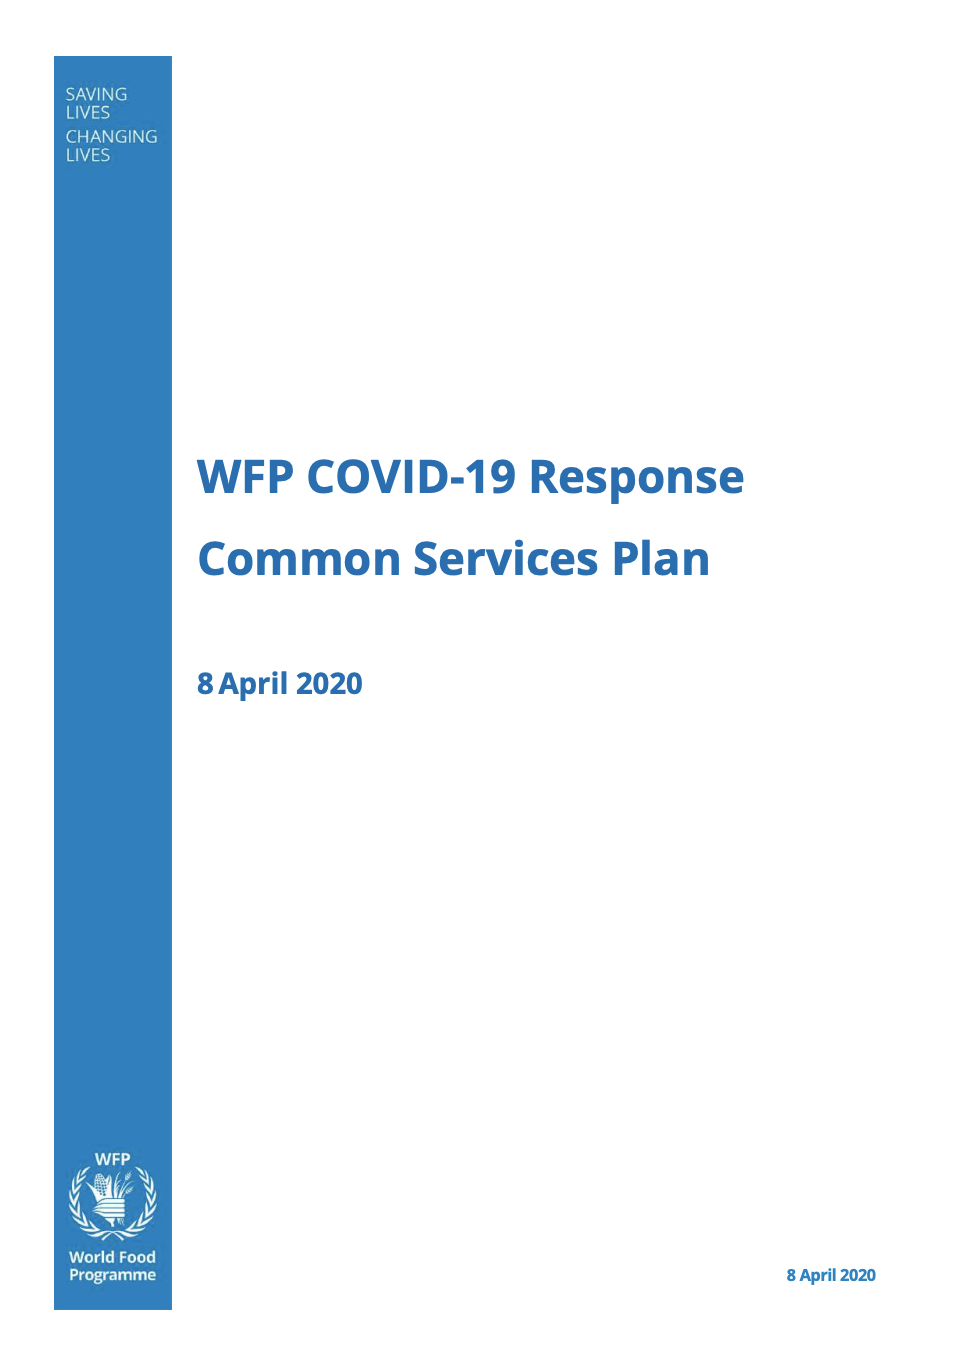 WFP COVID-19 Common Services Plan